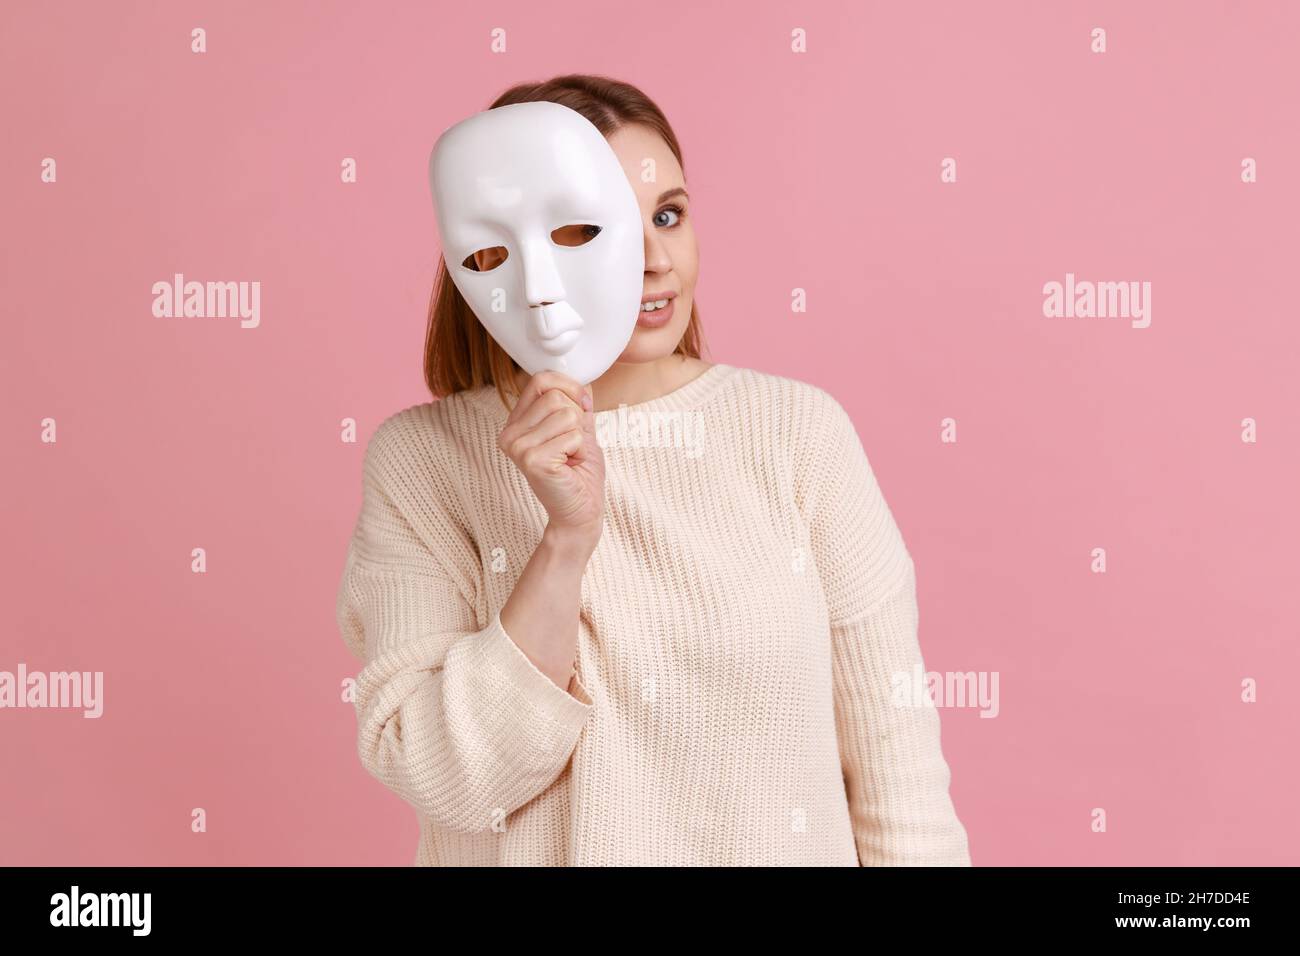 Portrait of smiling blond woman holding white mask, peeking, looking at camera, pretending to be another person, wearing white sweater. Indoor studio shot isolated on pink background. Stock Photo